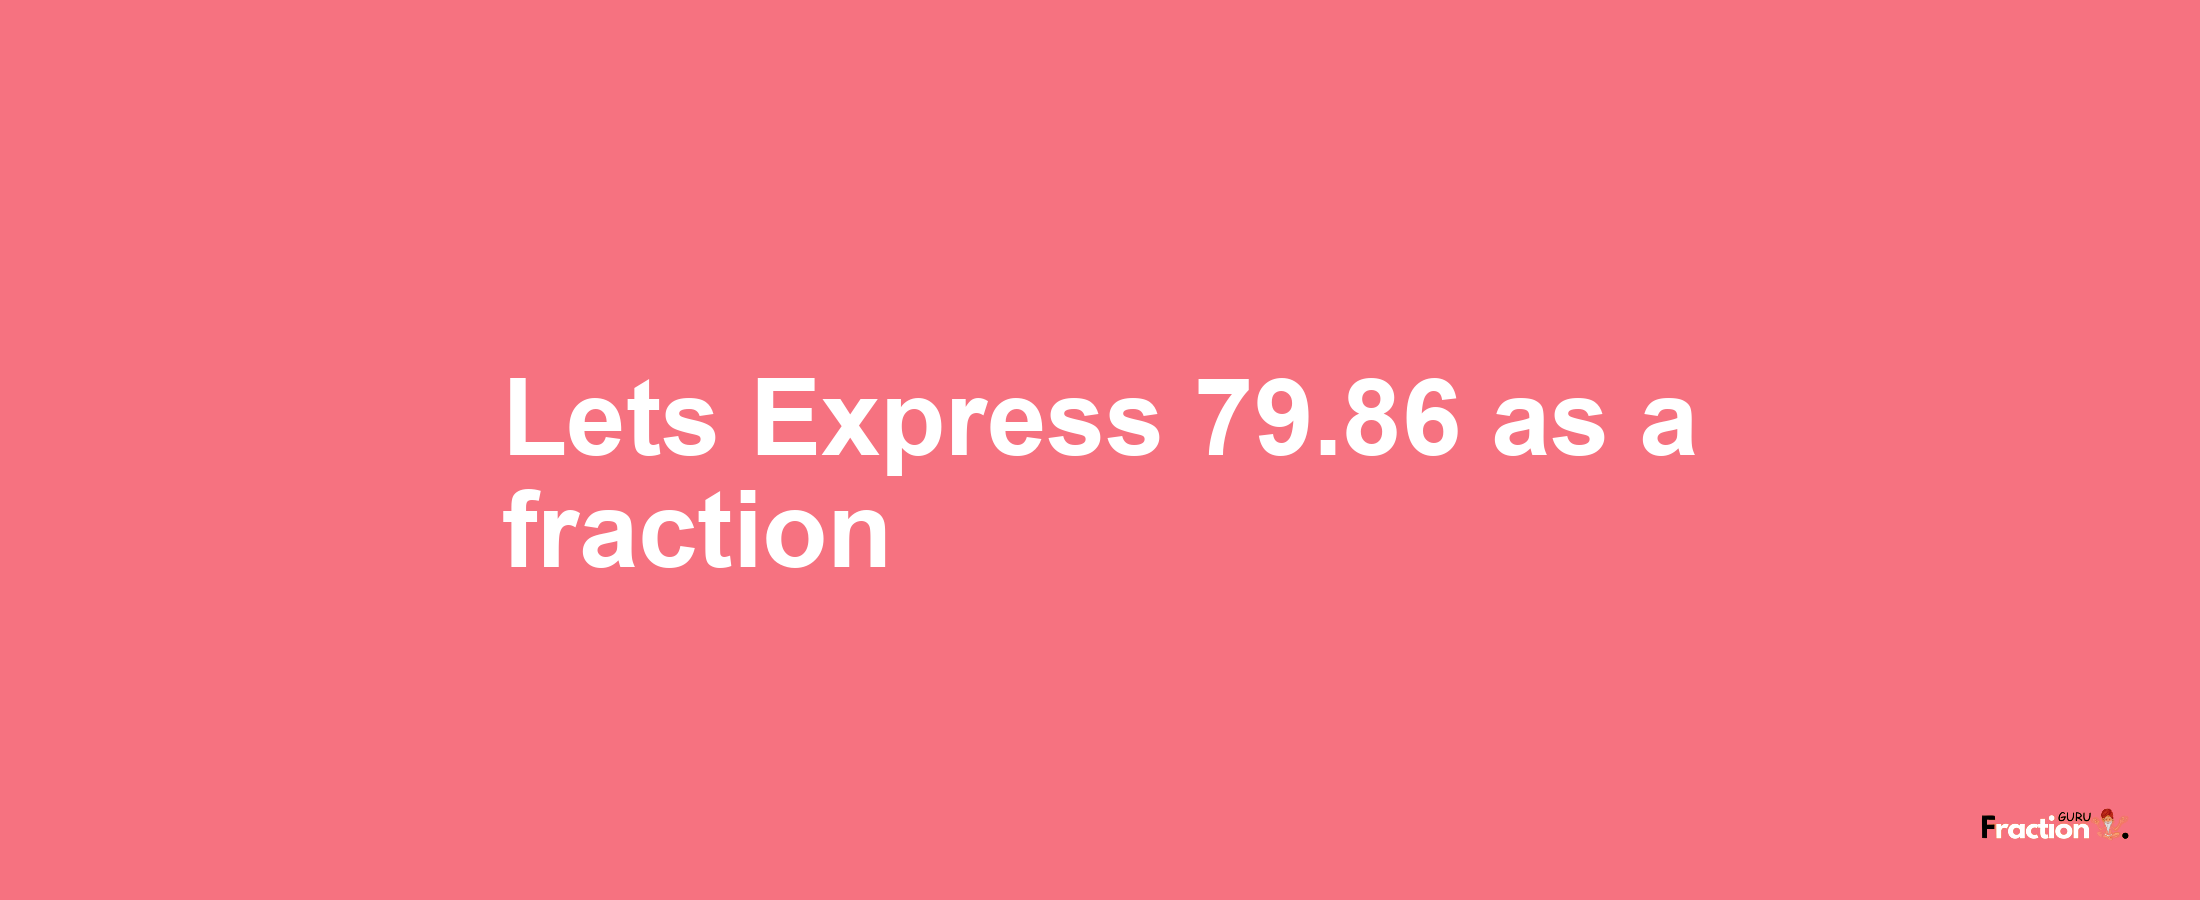 Lets Express 79.86 as afraction